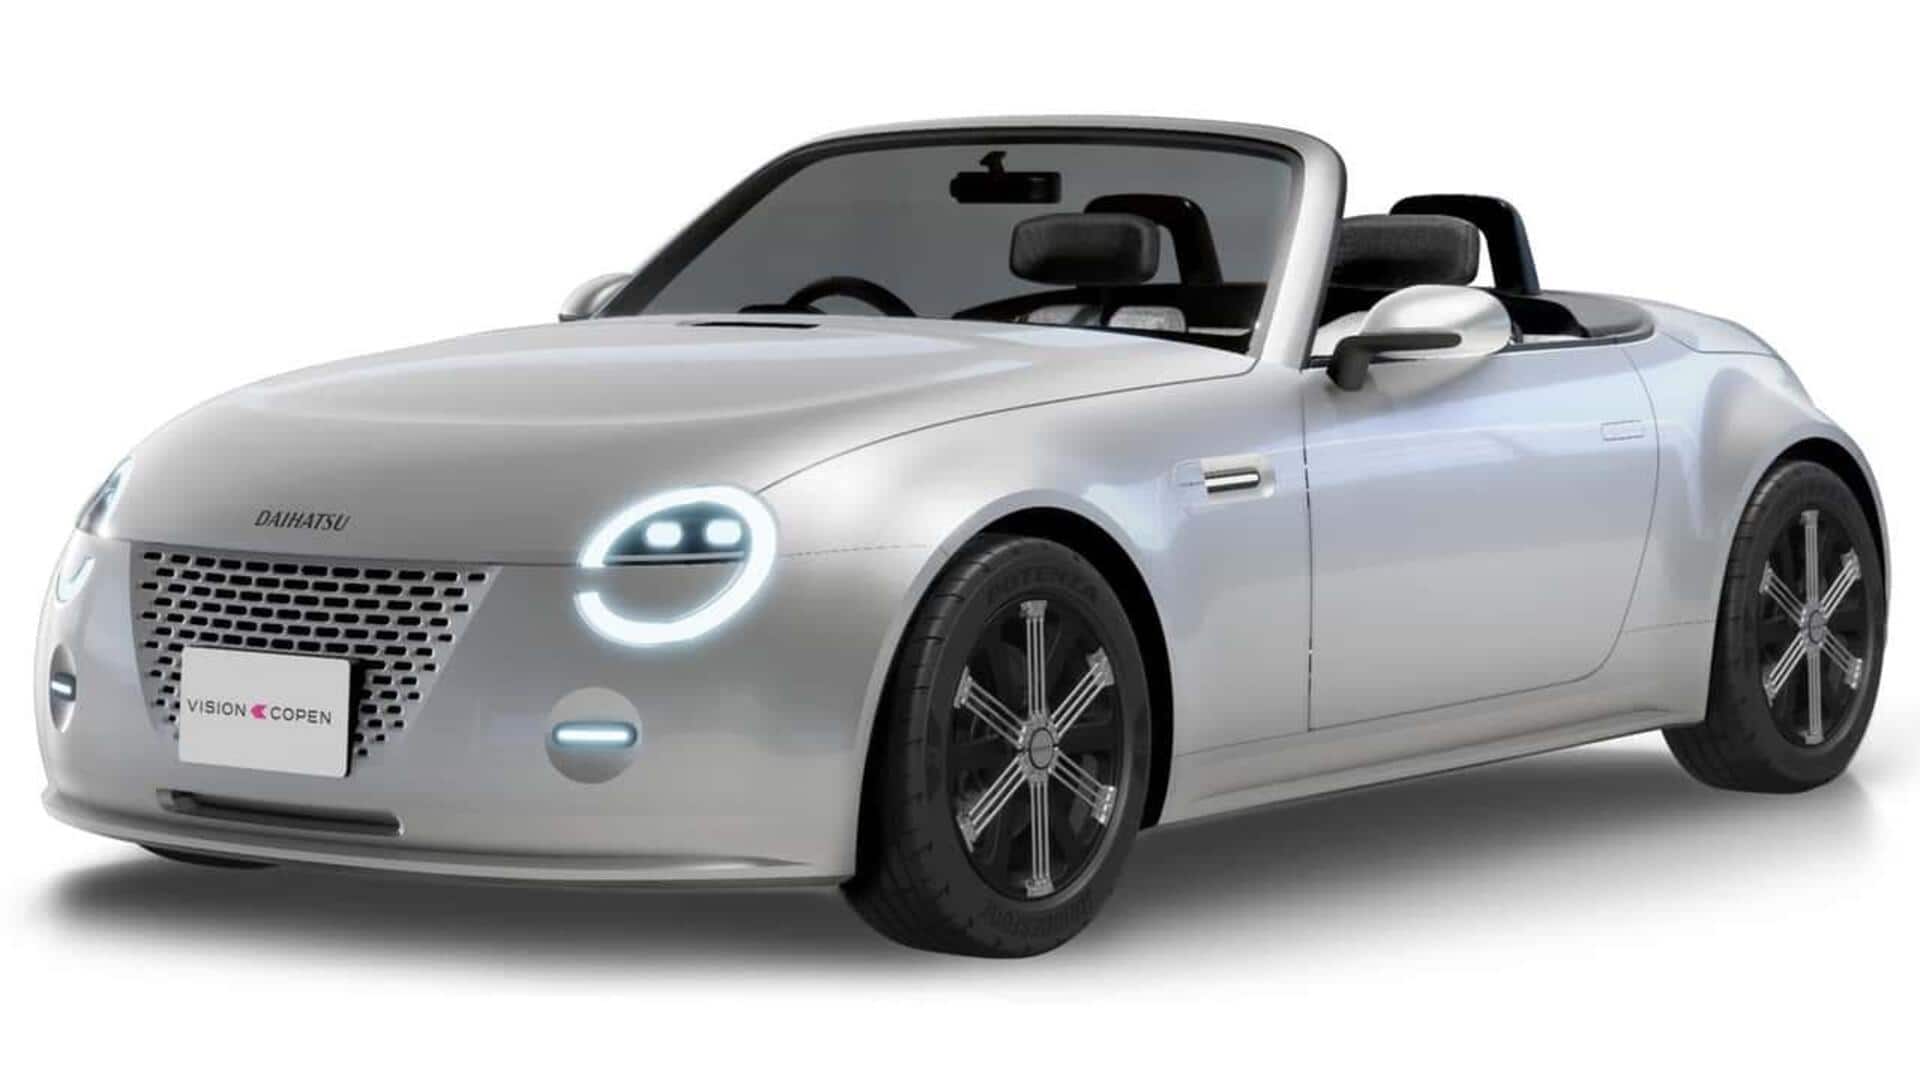 Daihatsu unveils Vision Copen concept with stylish appearance, larger engine